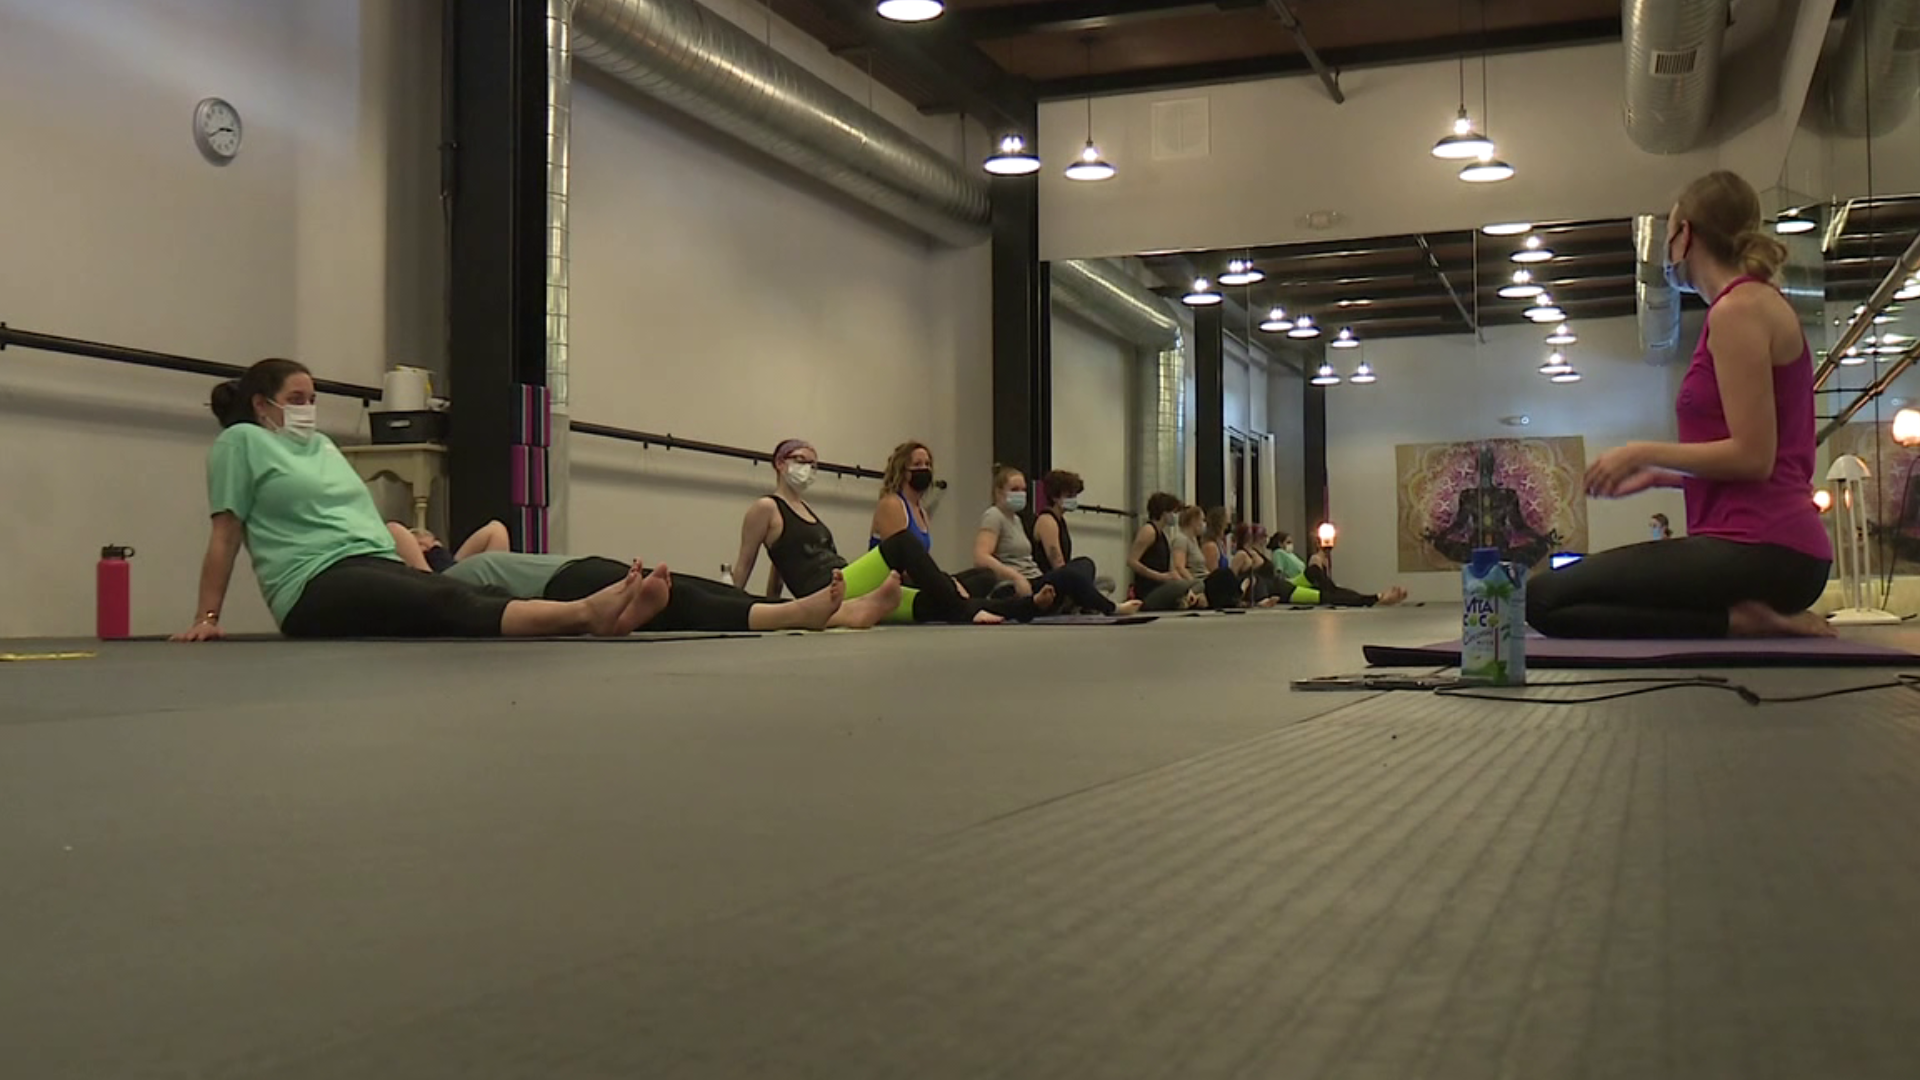 Feeling stressed out from the pandemic? Some yoga may help you out.